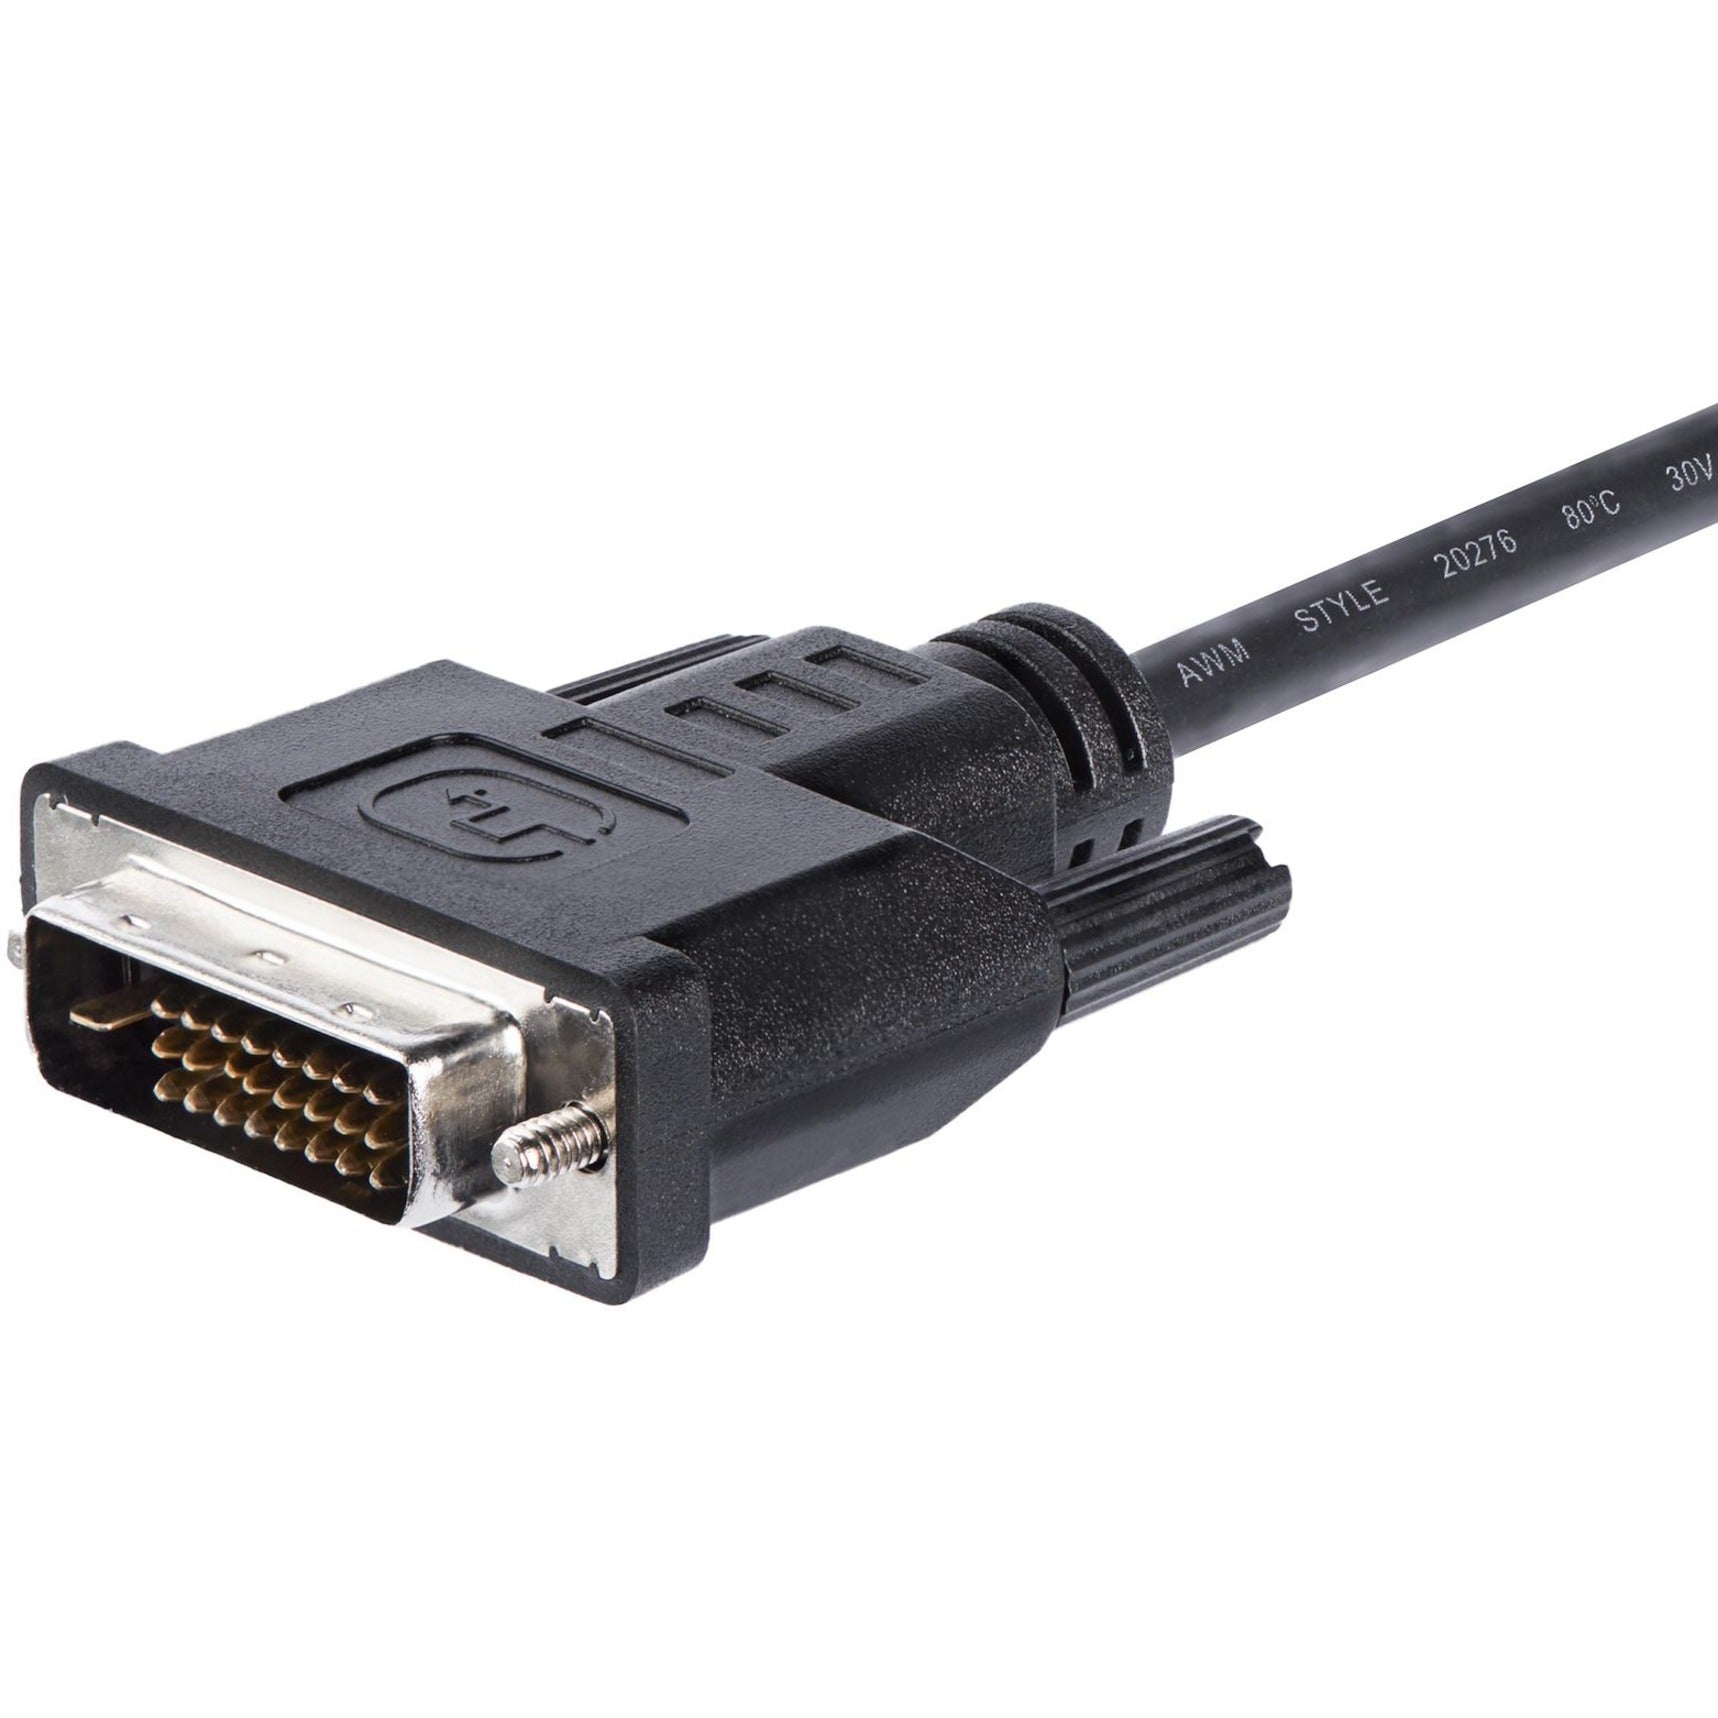 StarTech.com DVI2VGAE DVI-D to VGA Active Adapter Converter Cable - 1920x1200, USB Power Delivery (USB PD), 2-Year Warranty